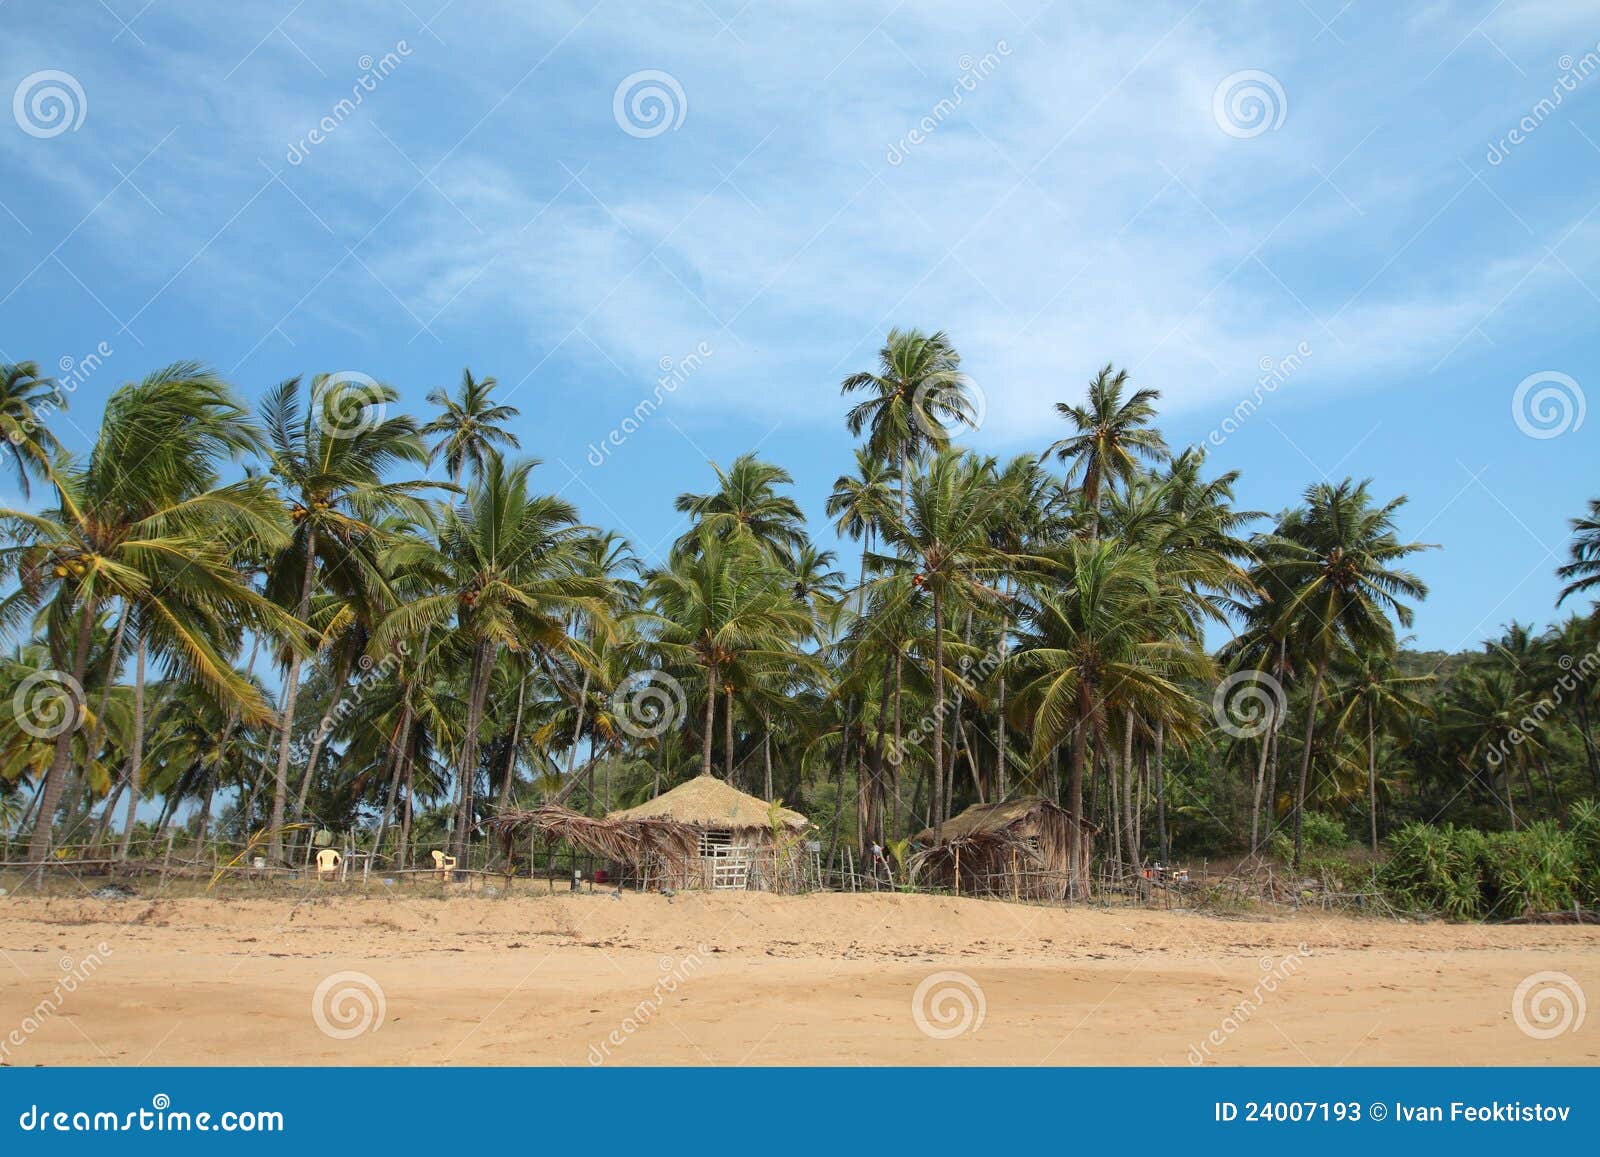 view of beach, summer houses and palm trees